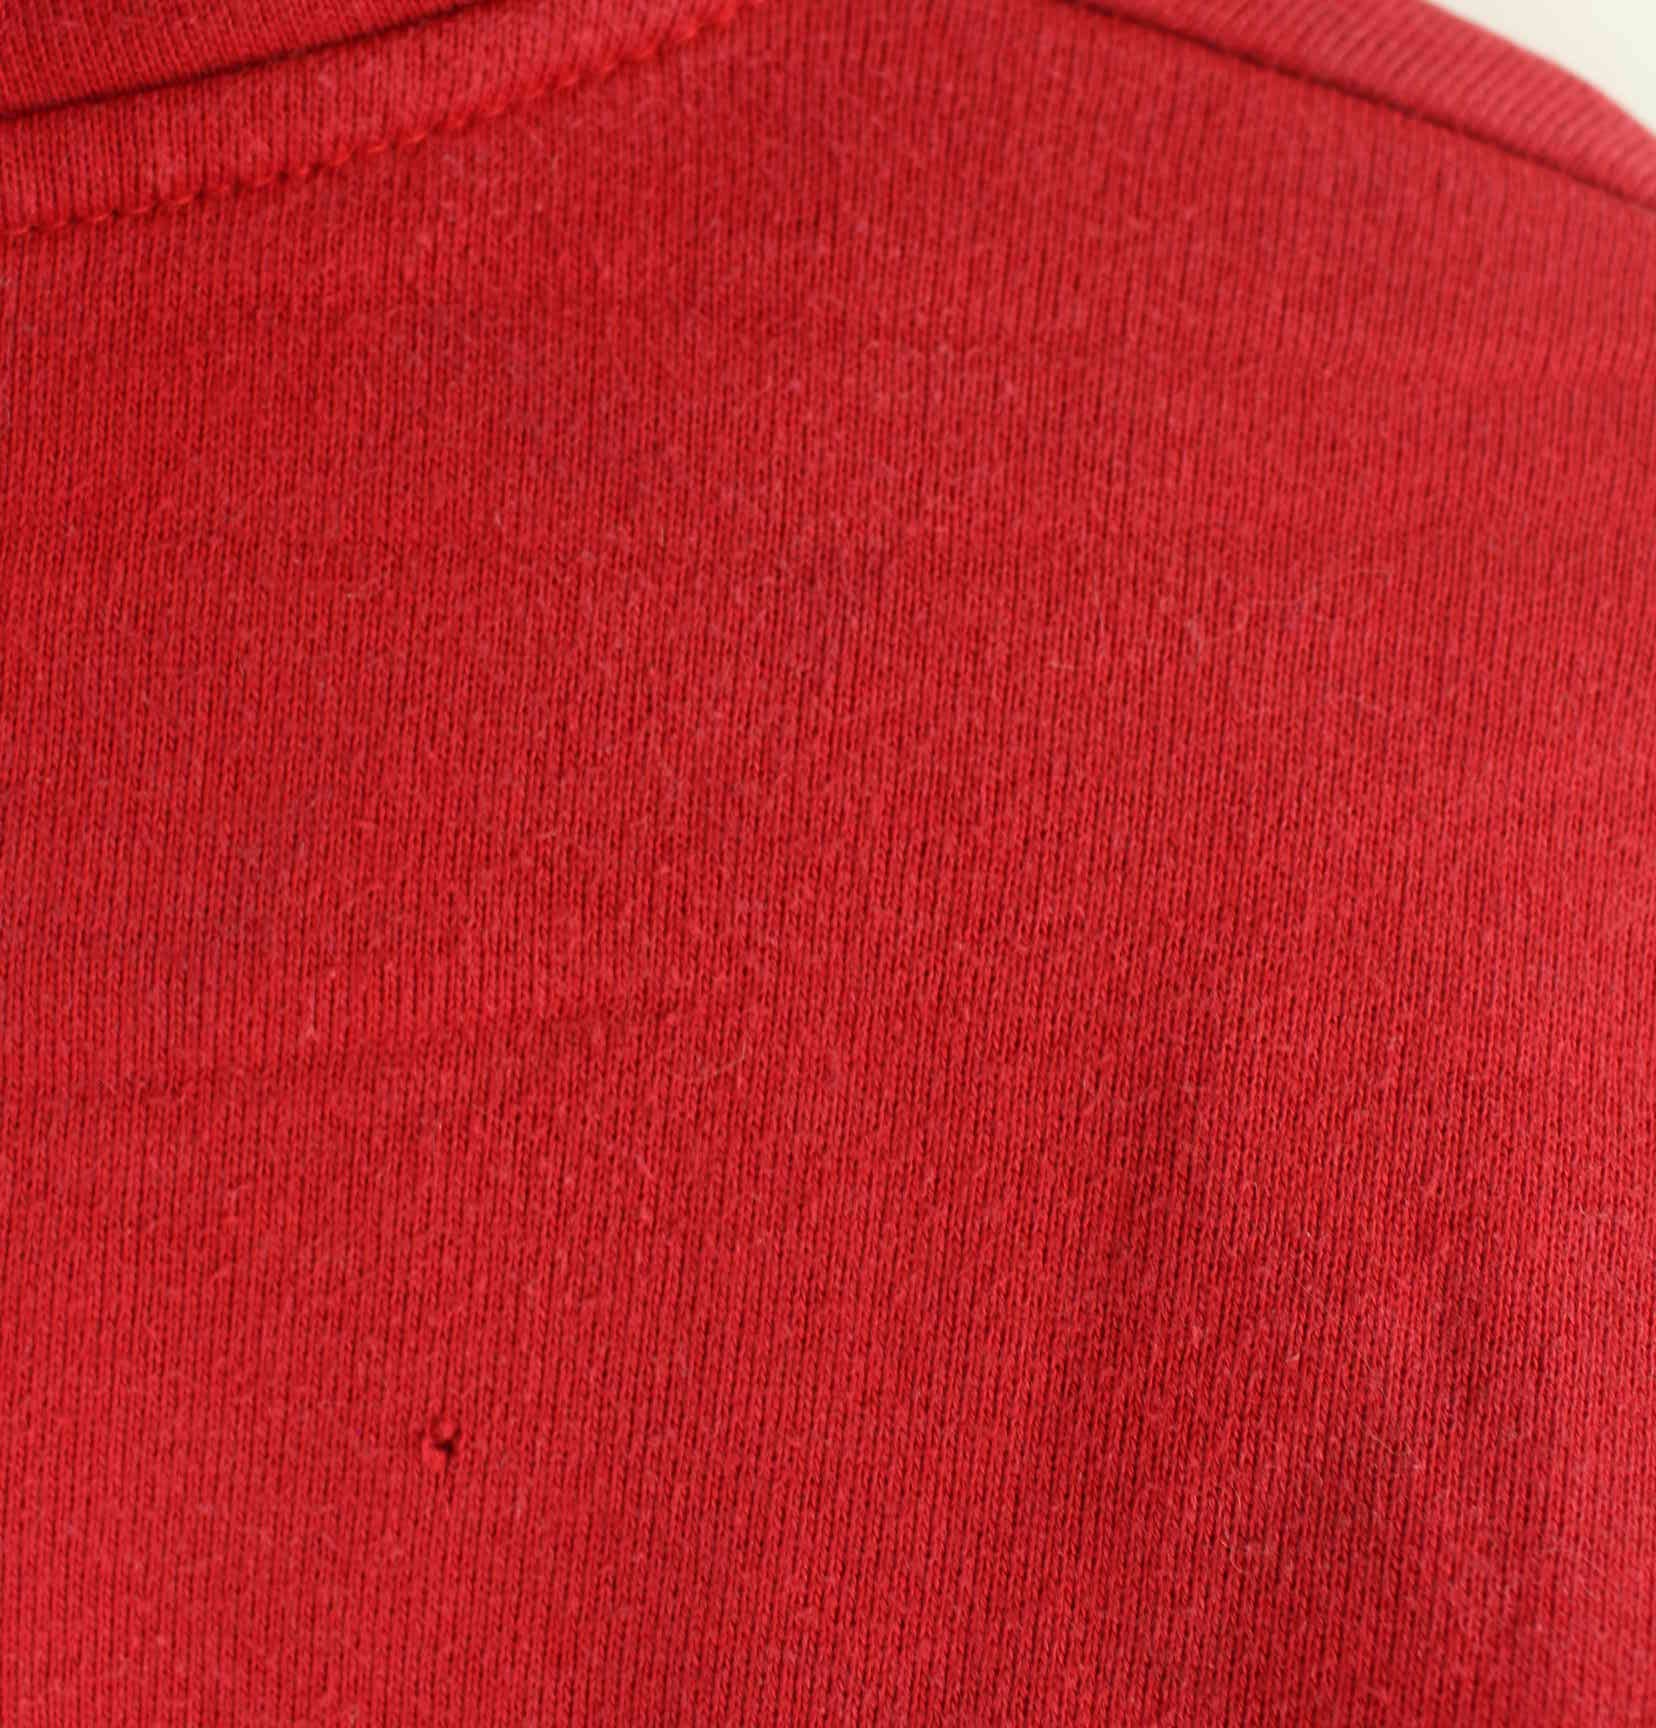 Quiksilver 90s Vintage Embroidered Print Hoodie Rot M (detail image 6)